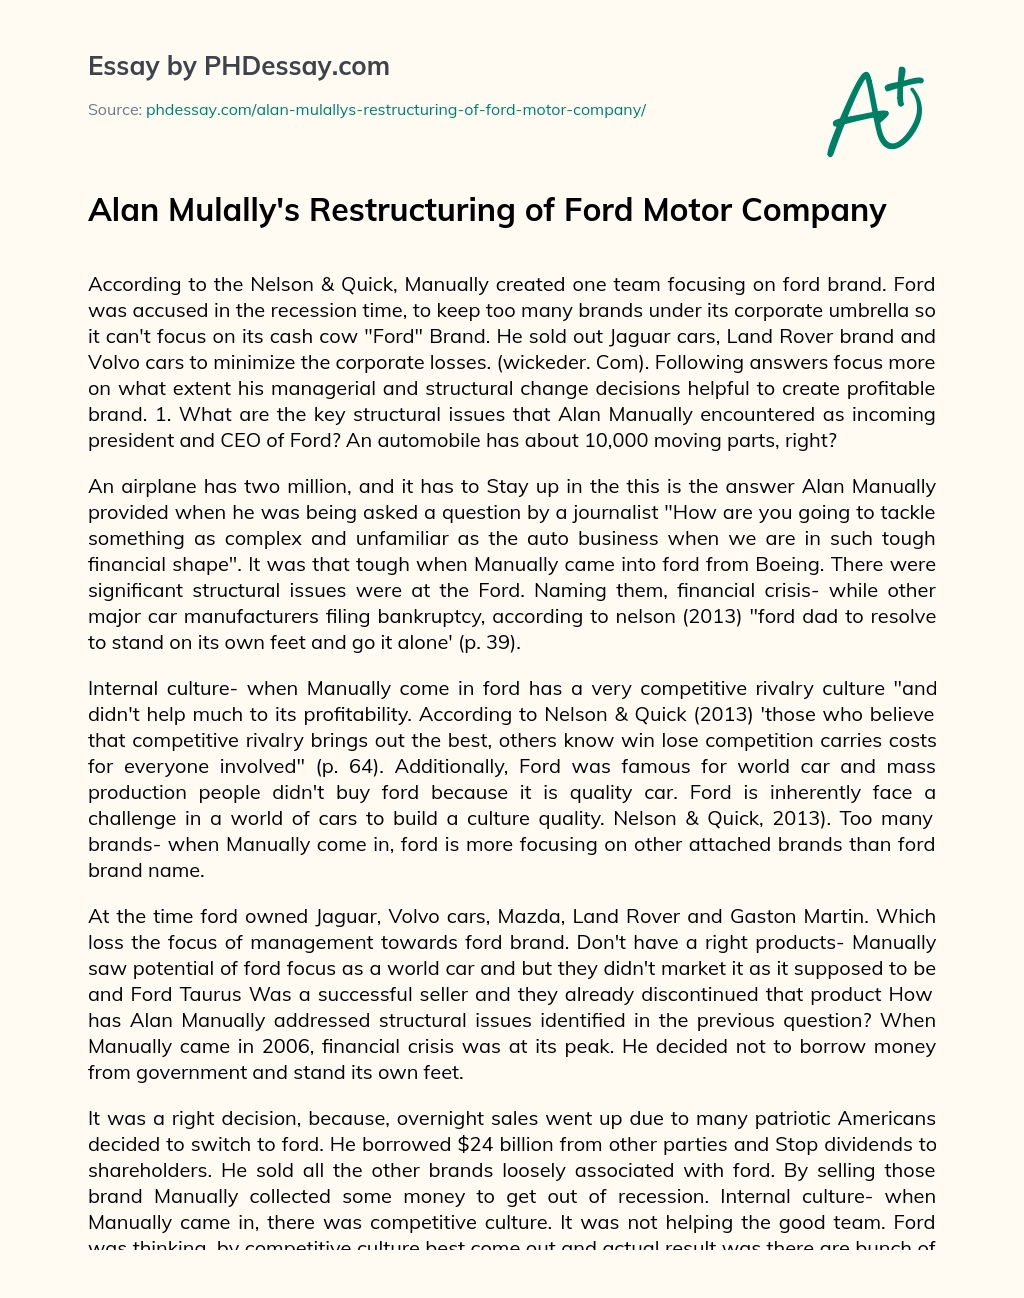 Alan Mulally’s Restructuring of Ford Motor Company essay